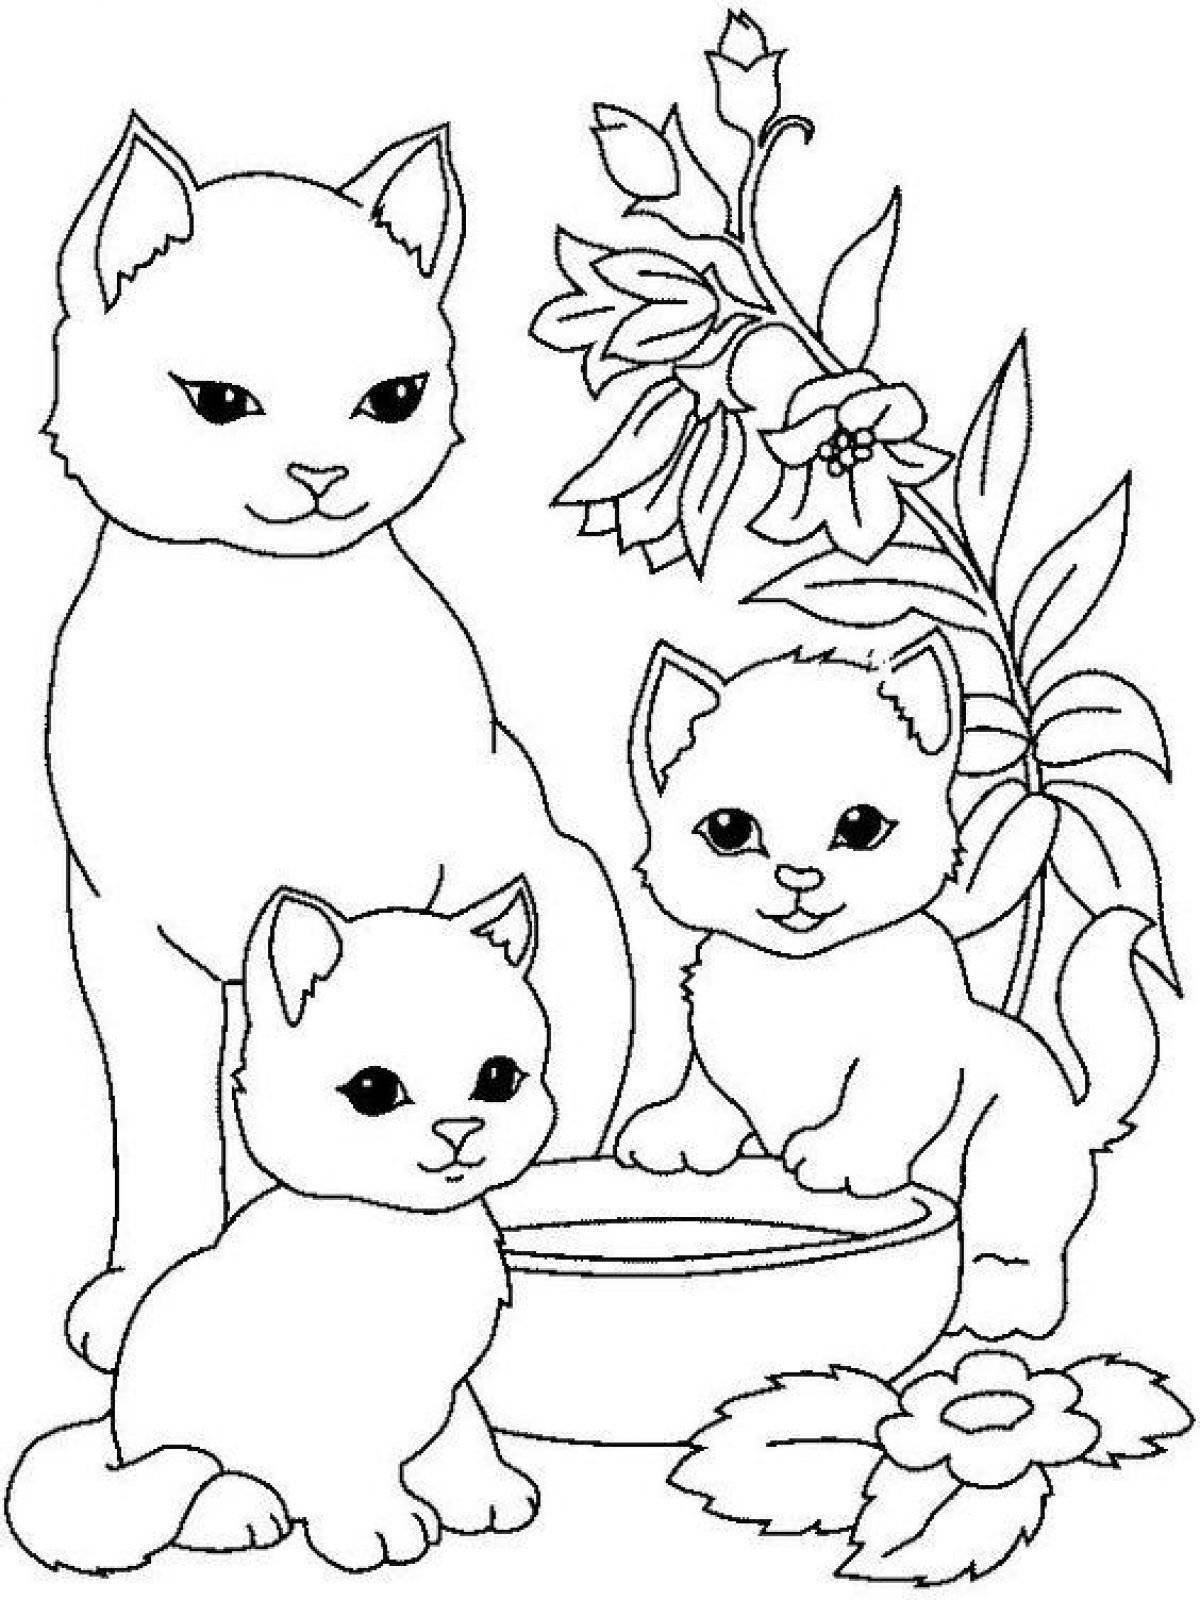 Kitty glitter coloring book for kids 5-6 years old